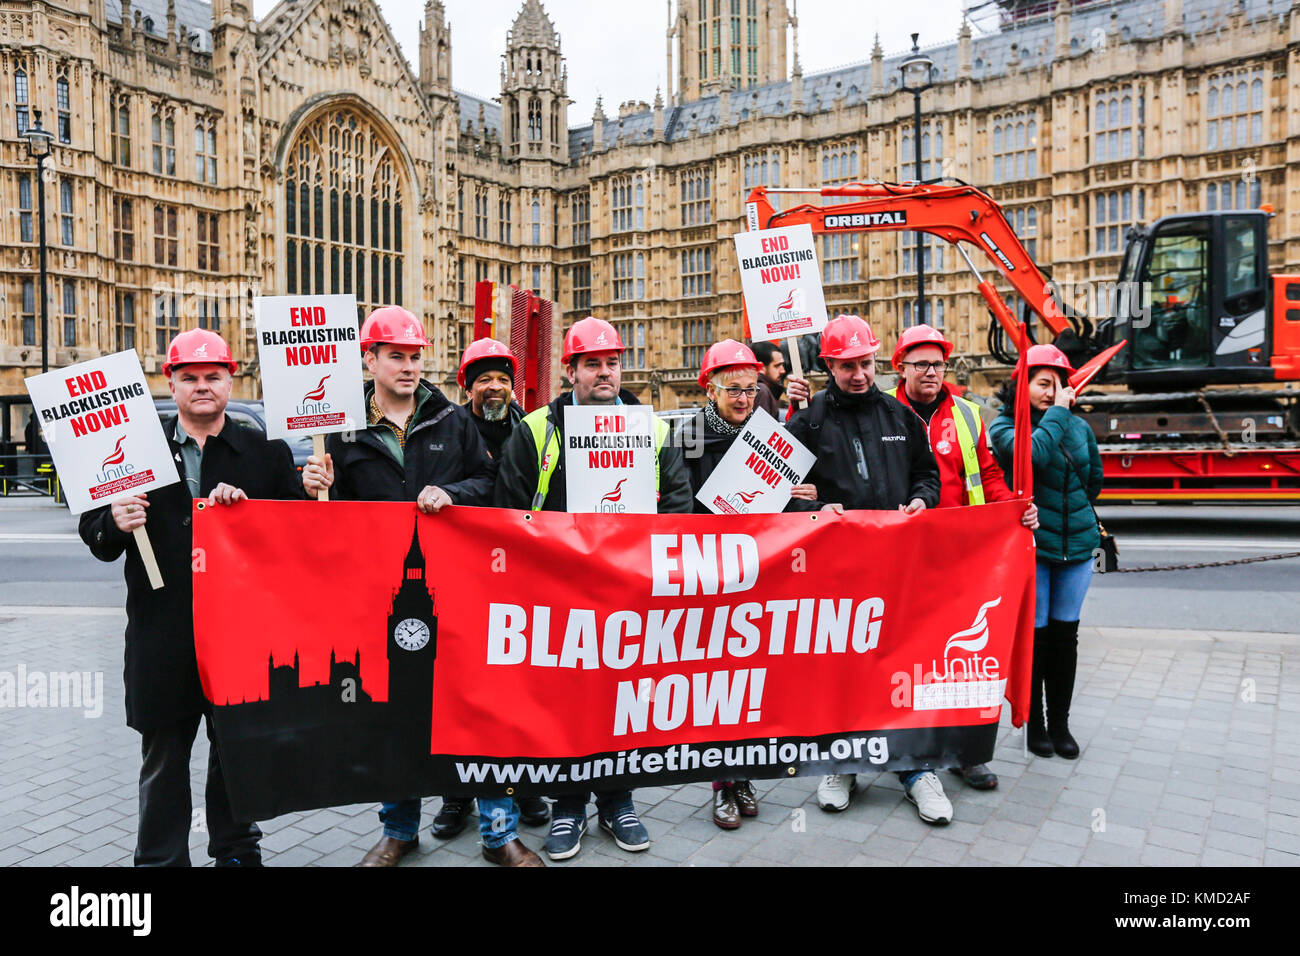 London,UK. 6 December 2017. Trade Unionists including Gail Cartmail, Assistant General Secretary of the trade union Unite, joined the call to demand a public inquiry into blacklisting and to create new laws preventing guilty companies from bidding for public sector contracts. David Rowe/Alamy Live News. Stock Photo